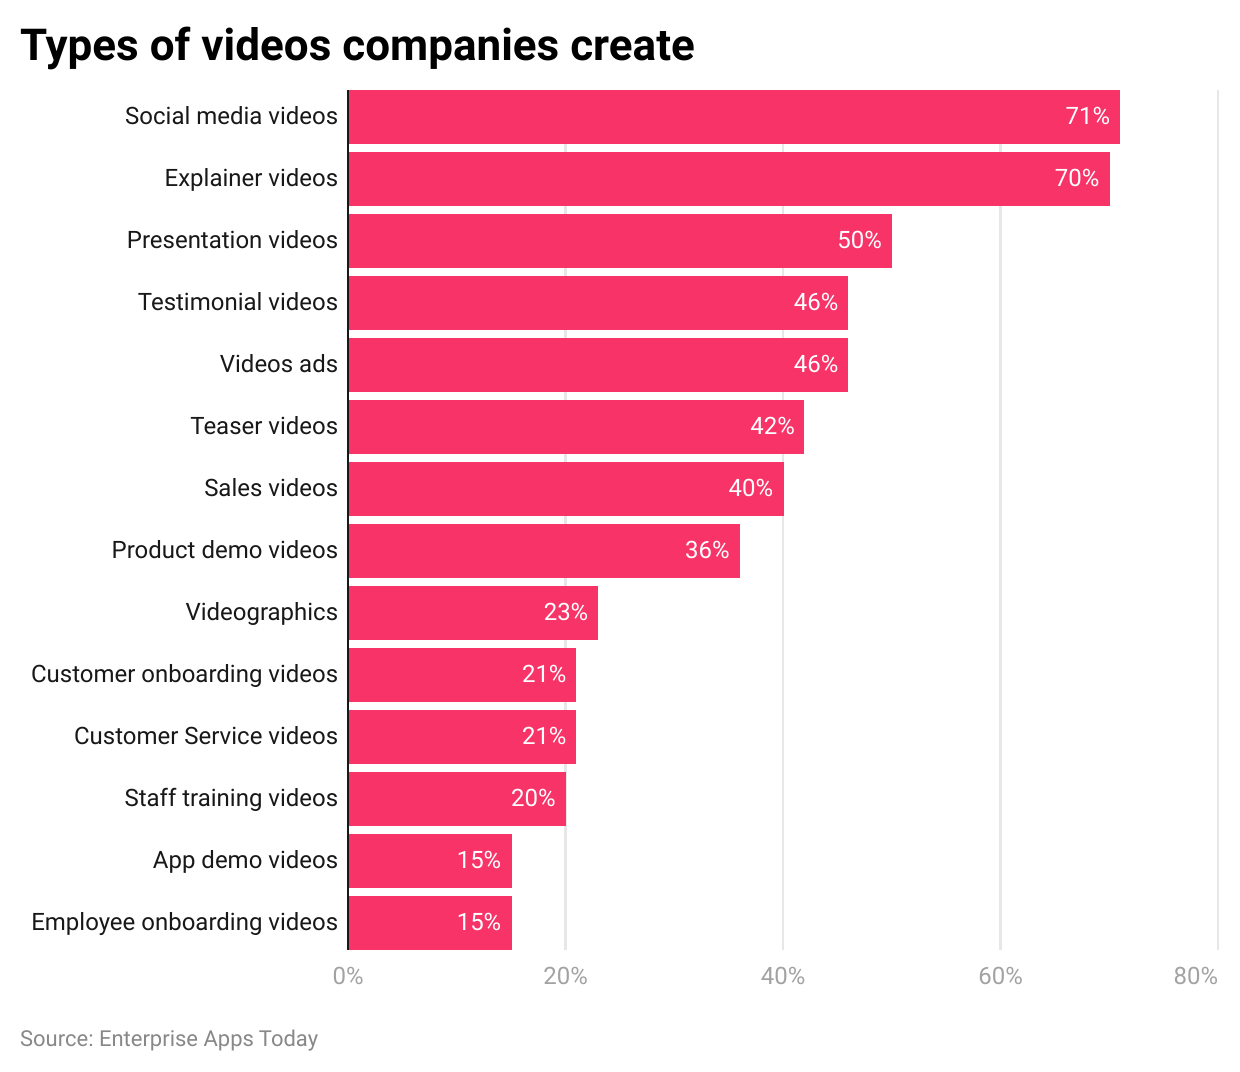 Video Marketing Statistics by Types of Videos